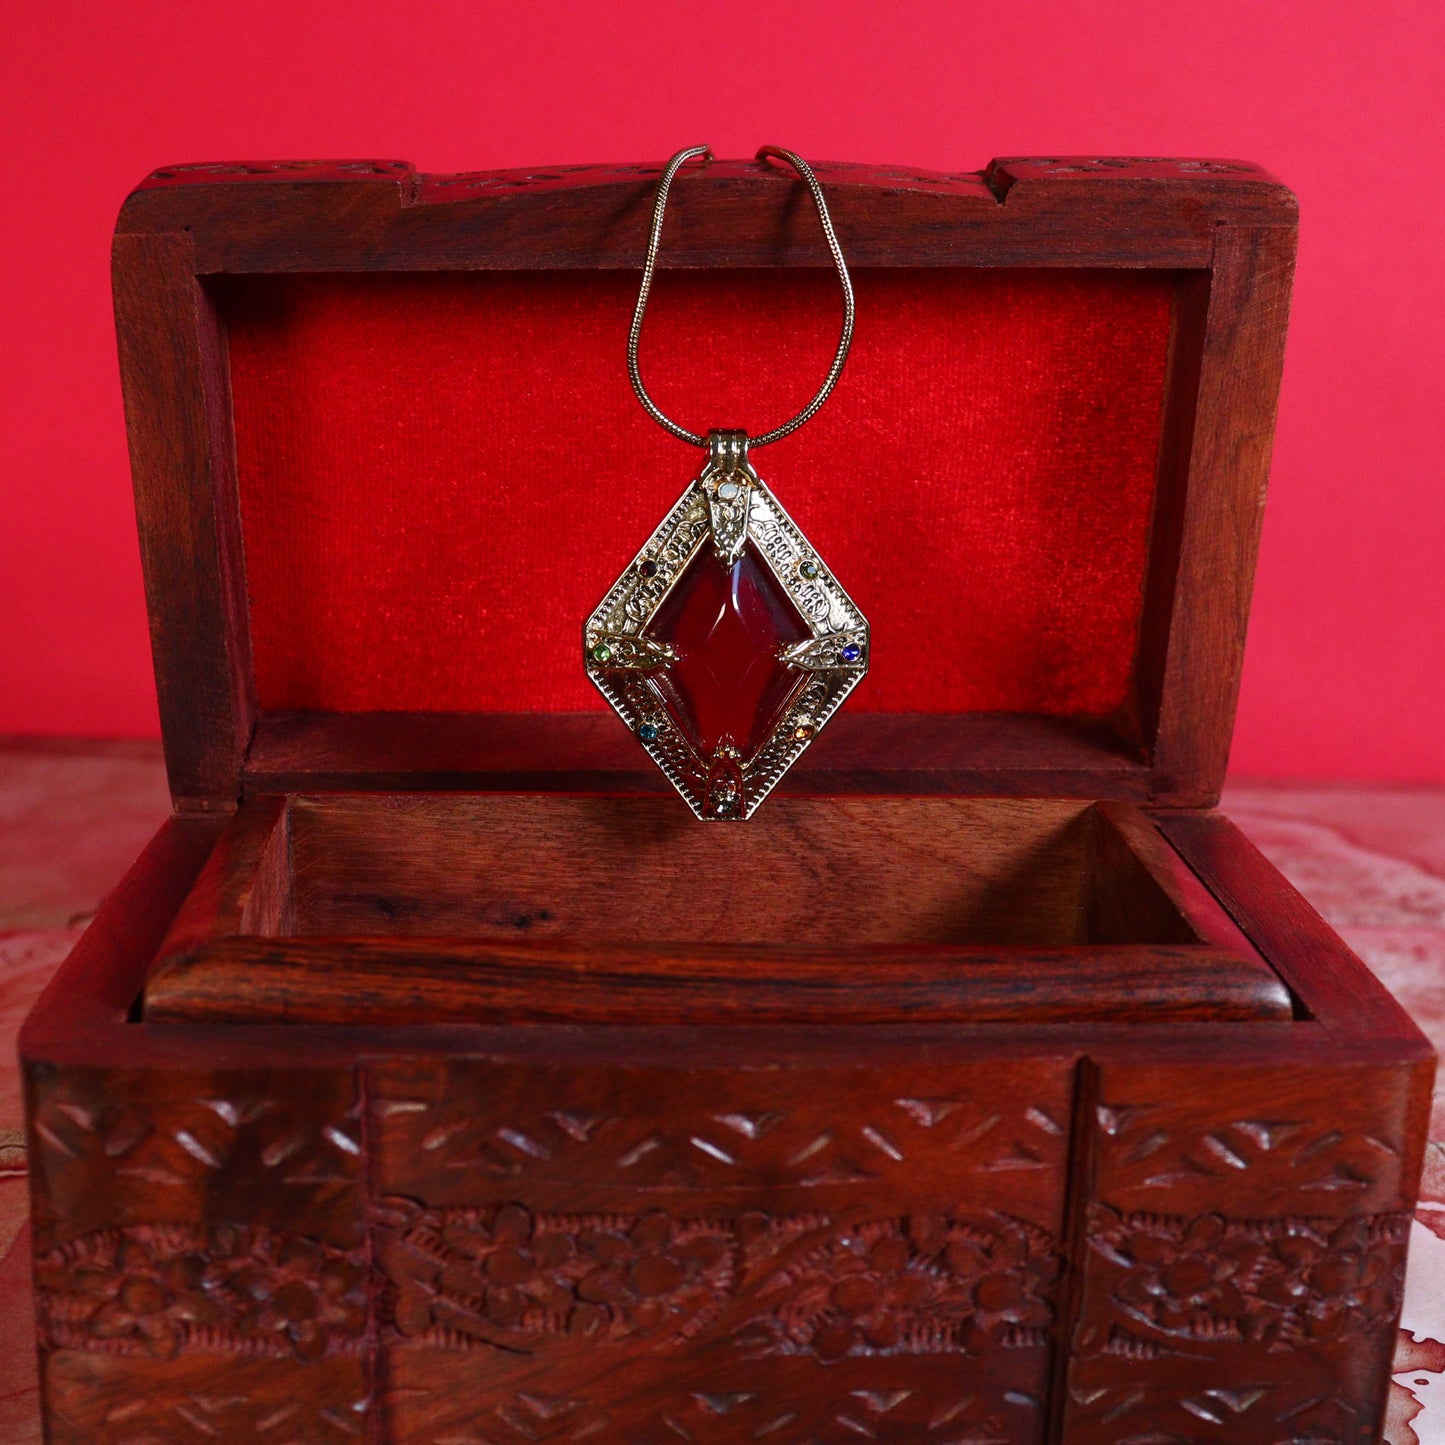 The Elder Scrolls IV: Oblivion Limited Edition Replica Amulet of Kings Necklace